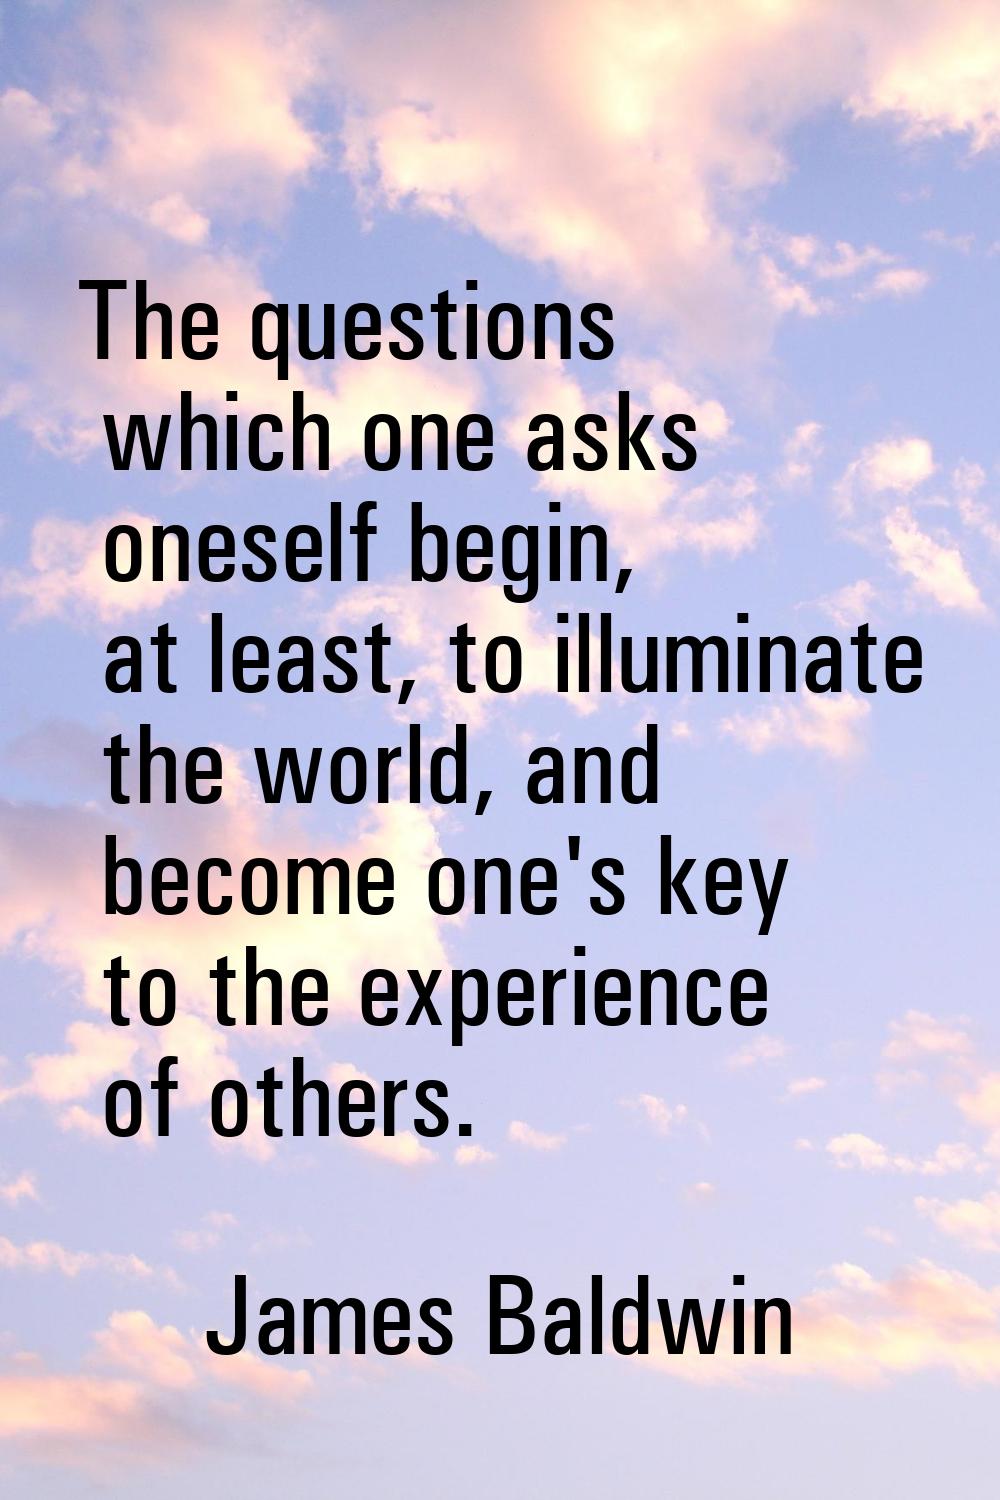 The questions which one asks oneself begin, at least, to illuminate the world, and become one's key